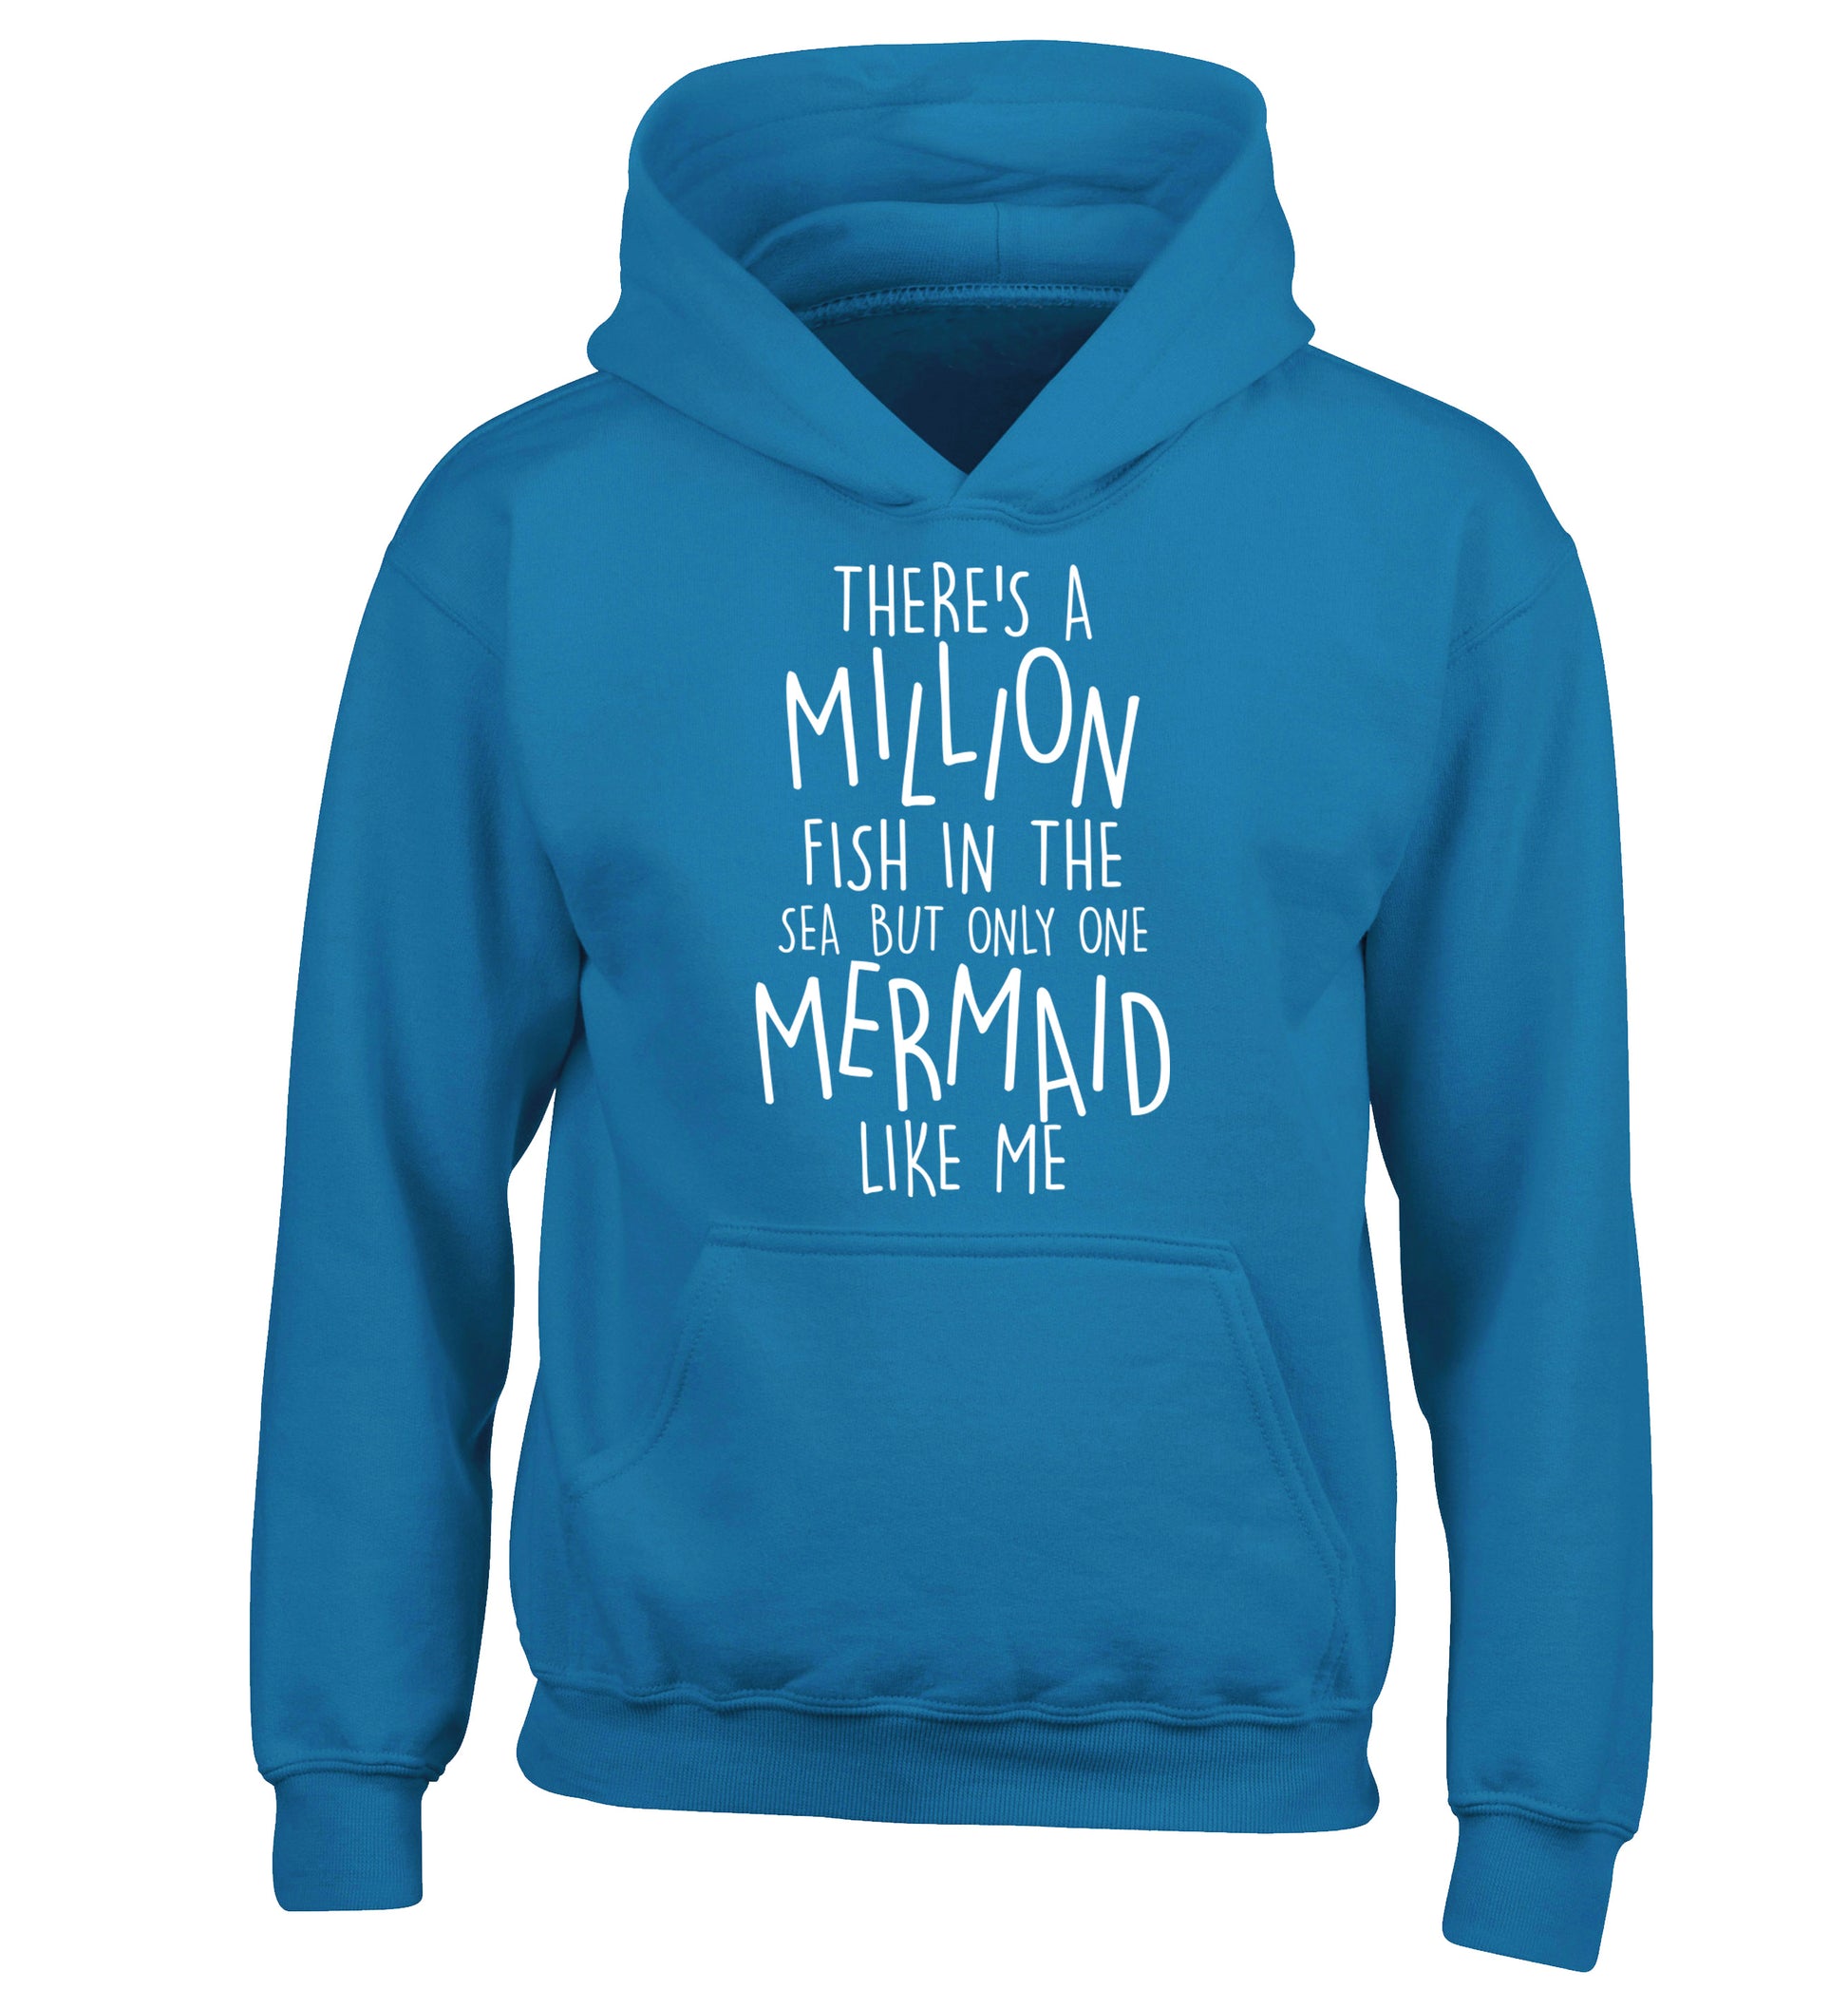 There's a million fish in the sea but only one mermaid like me children's blue hoodie 12-13 Years